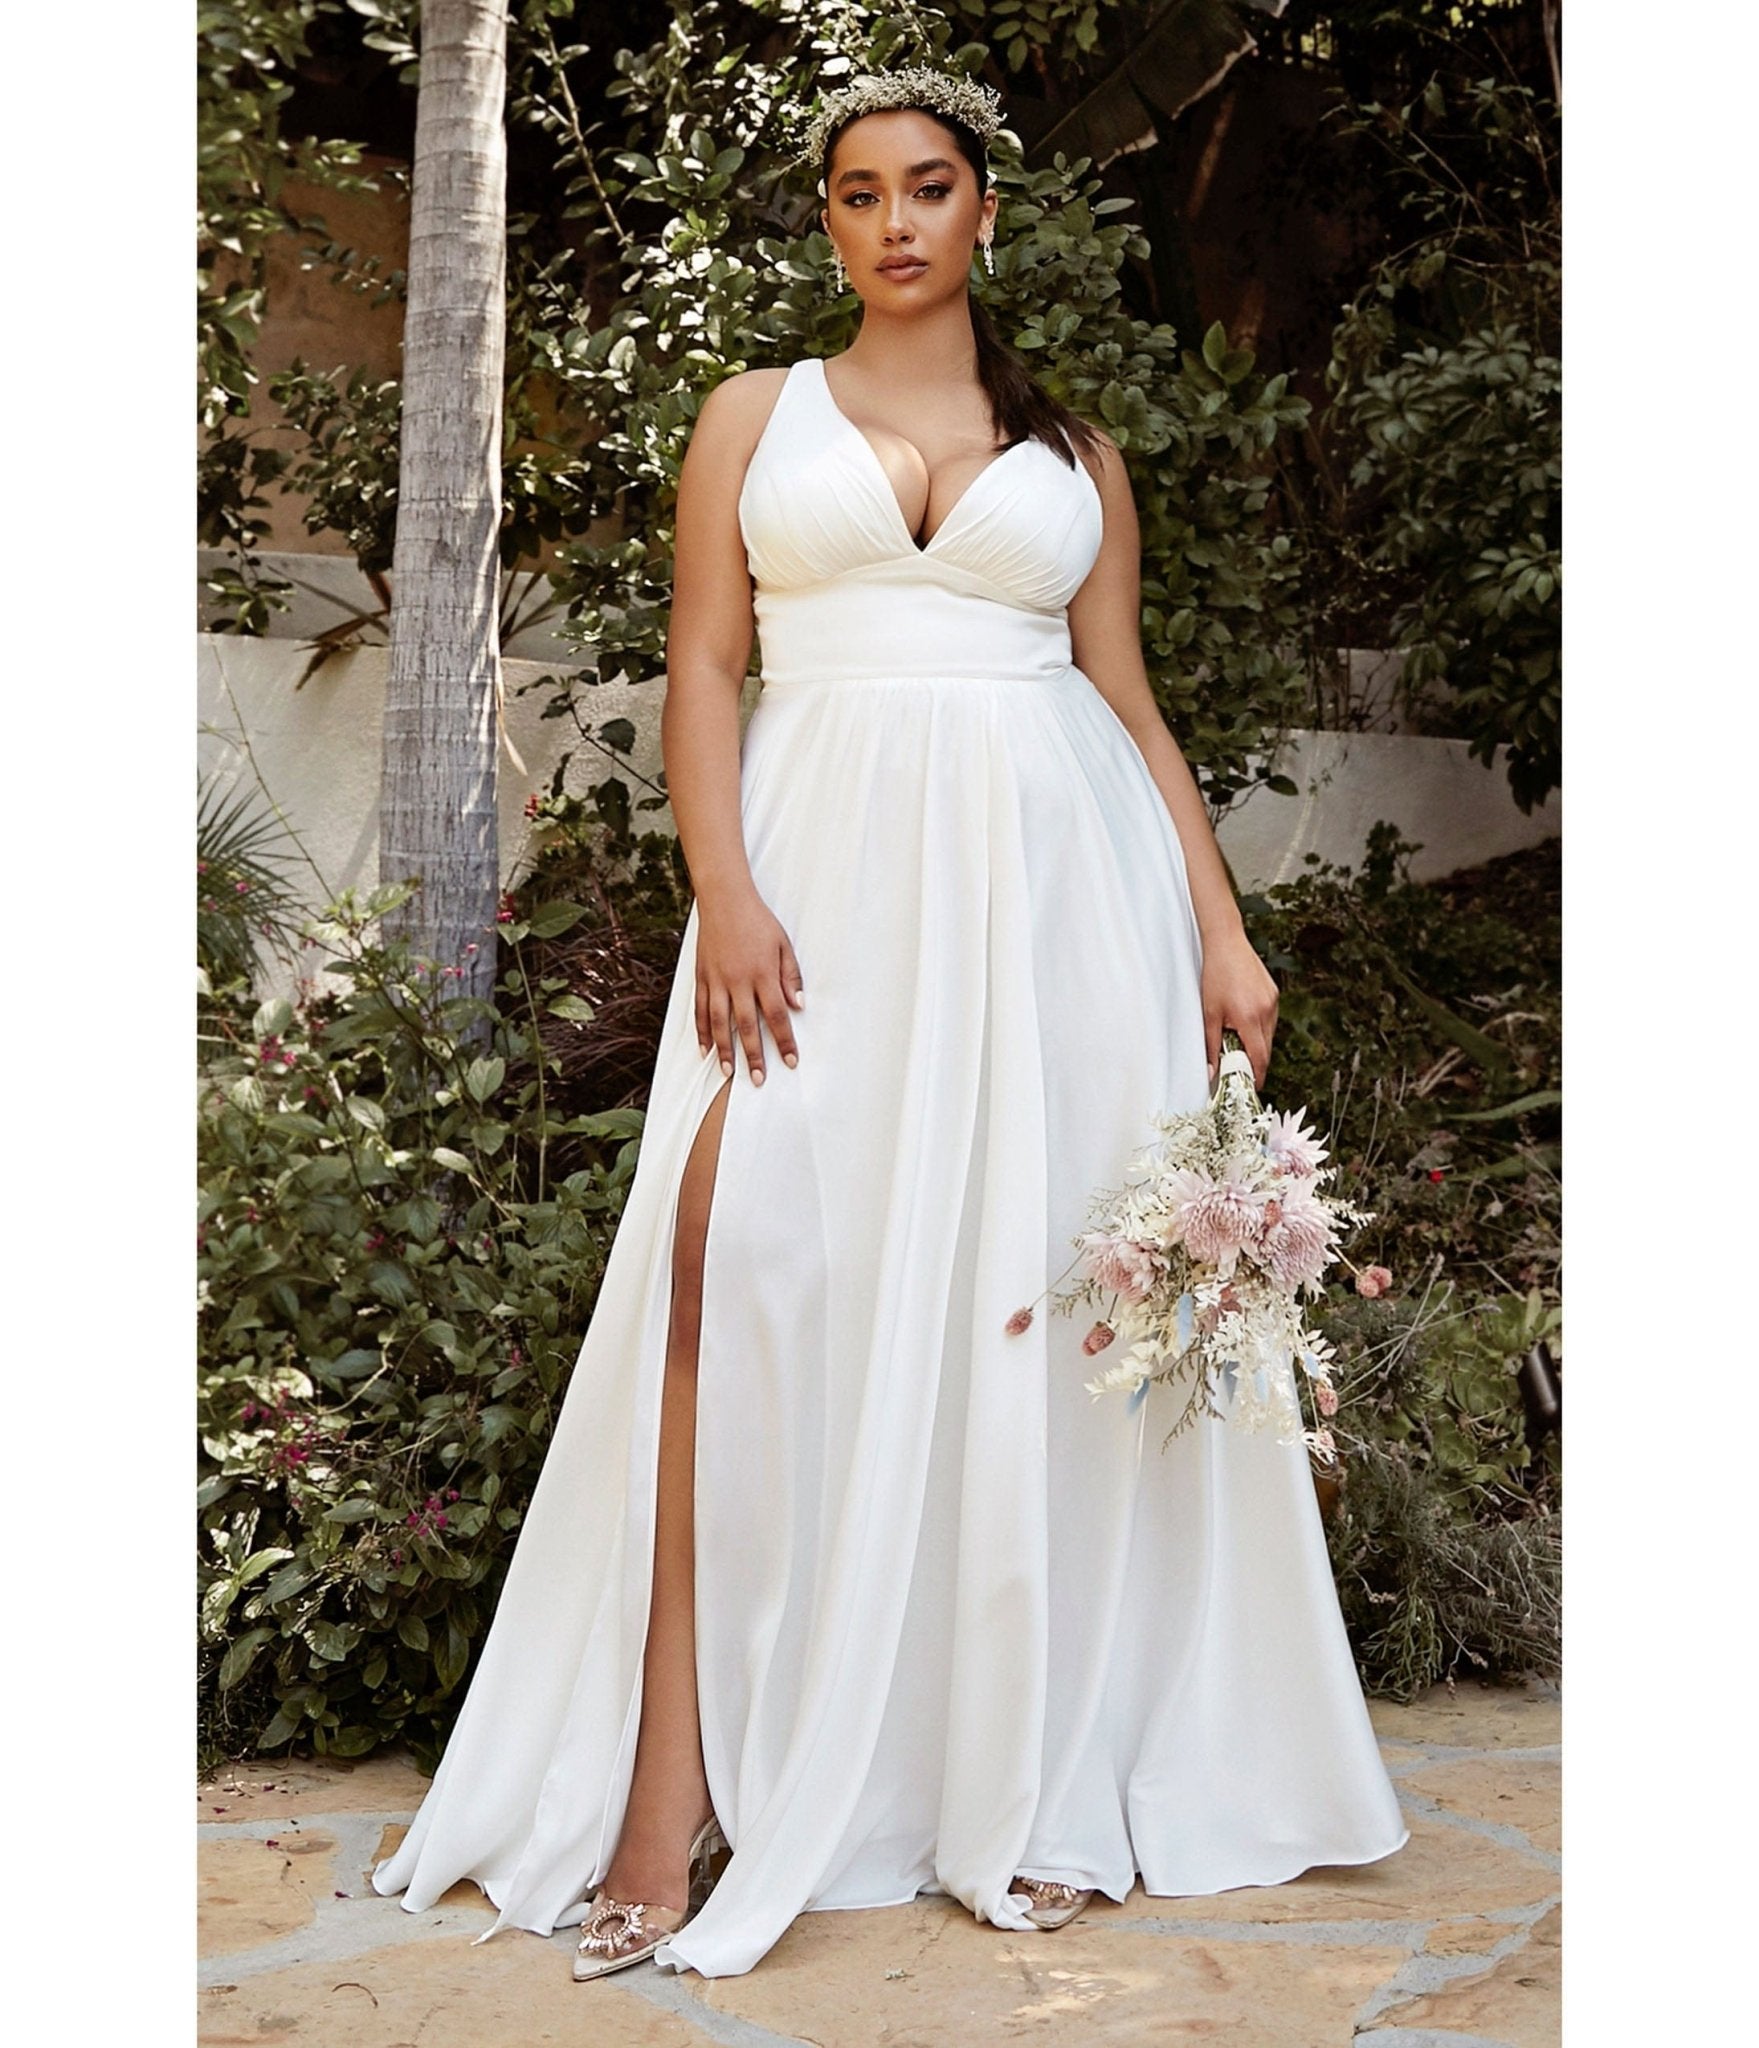 The 10 Best Places to Buy Wedding Dresses Online